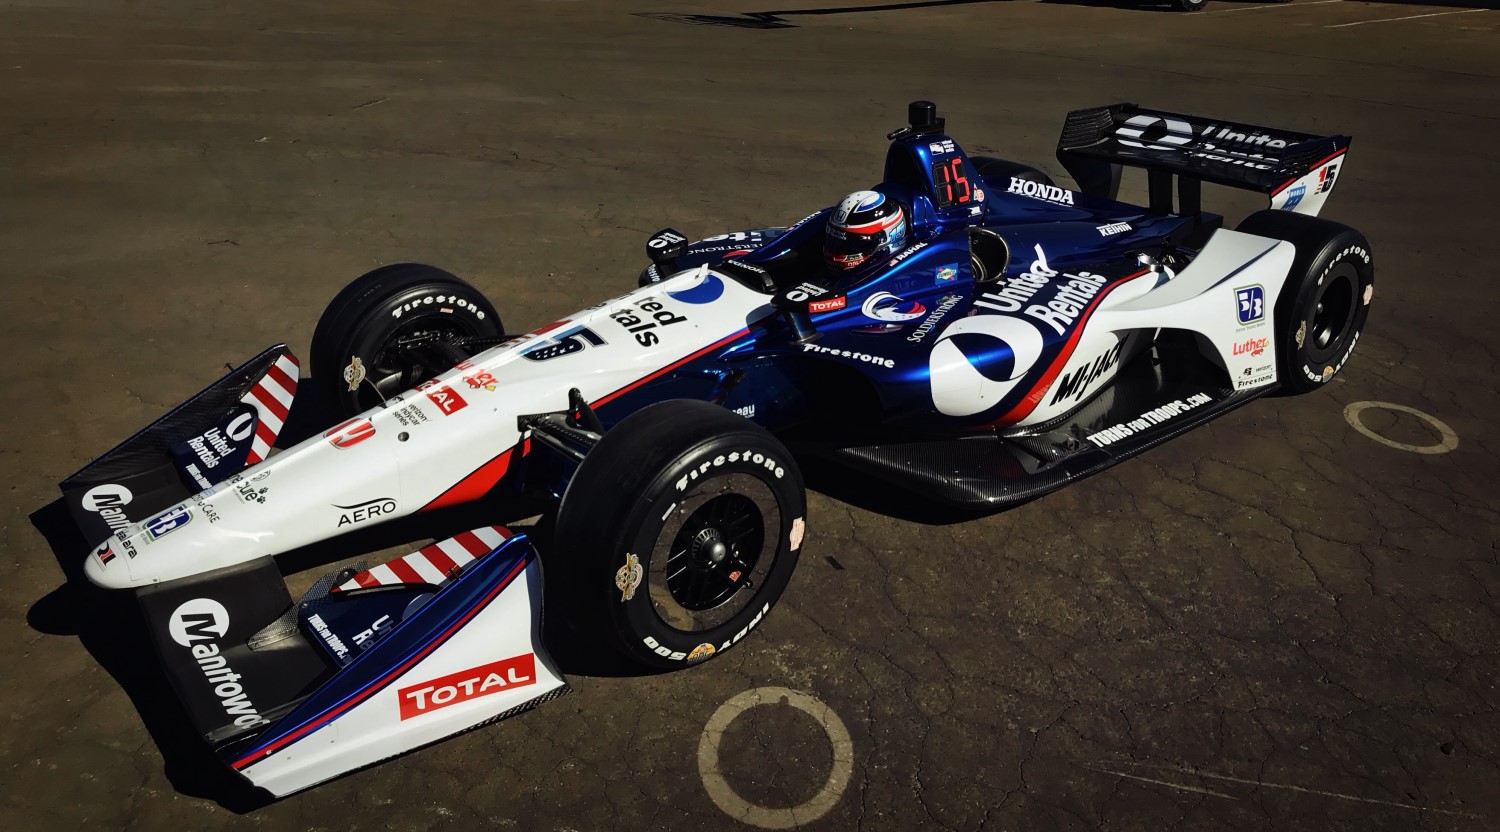 Rahal's livery with United Rentals